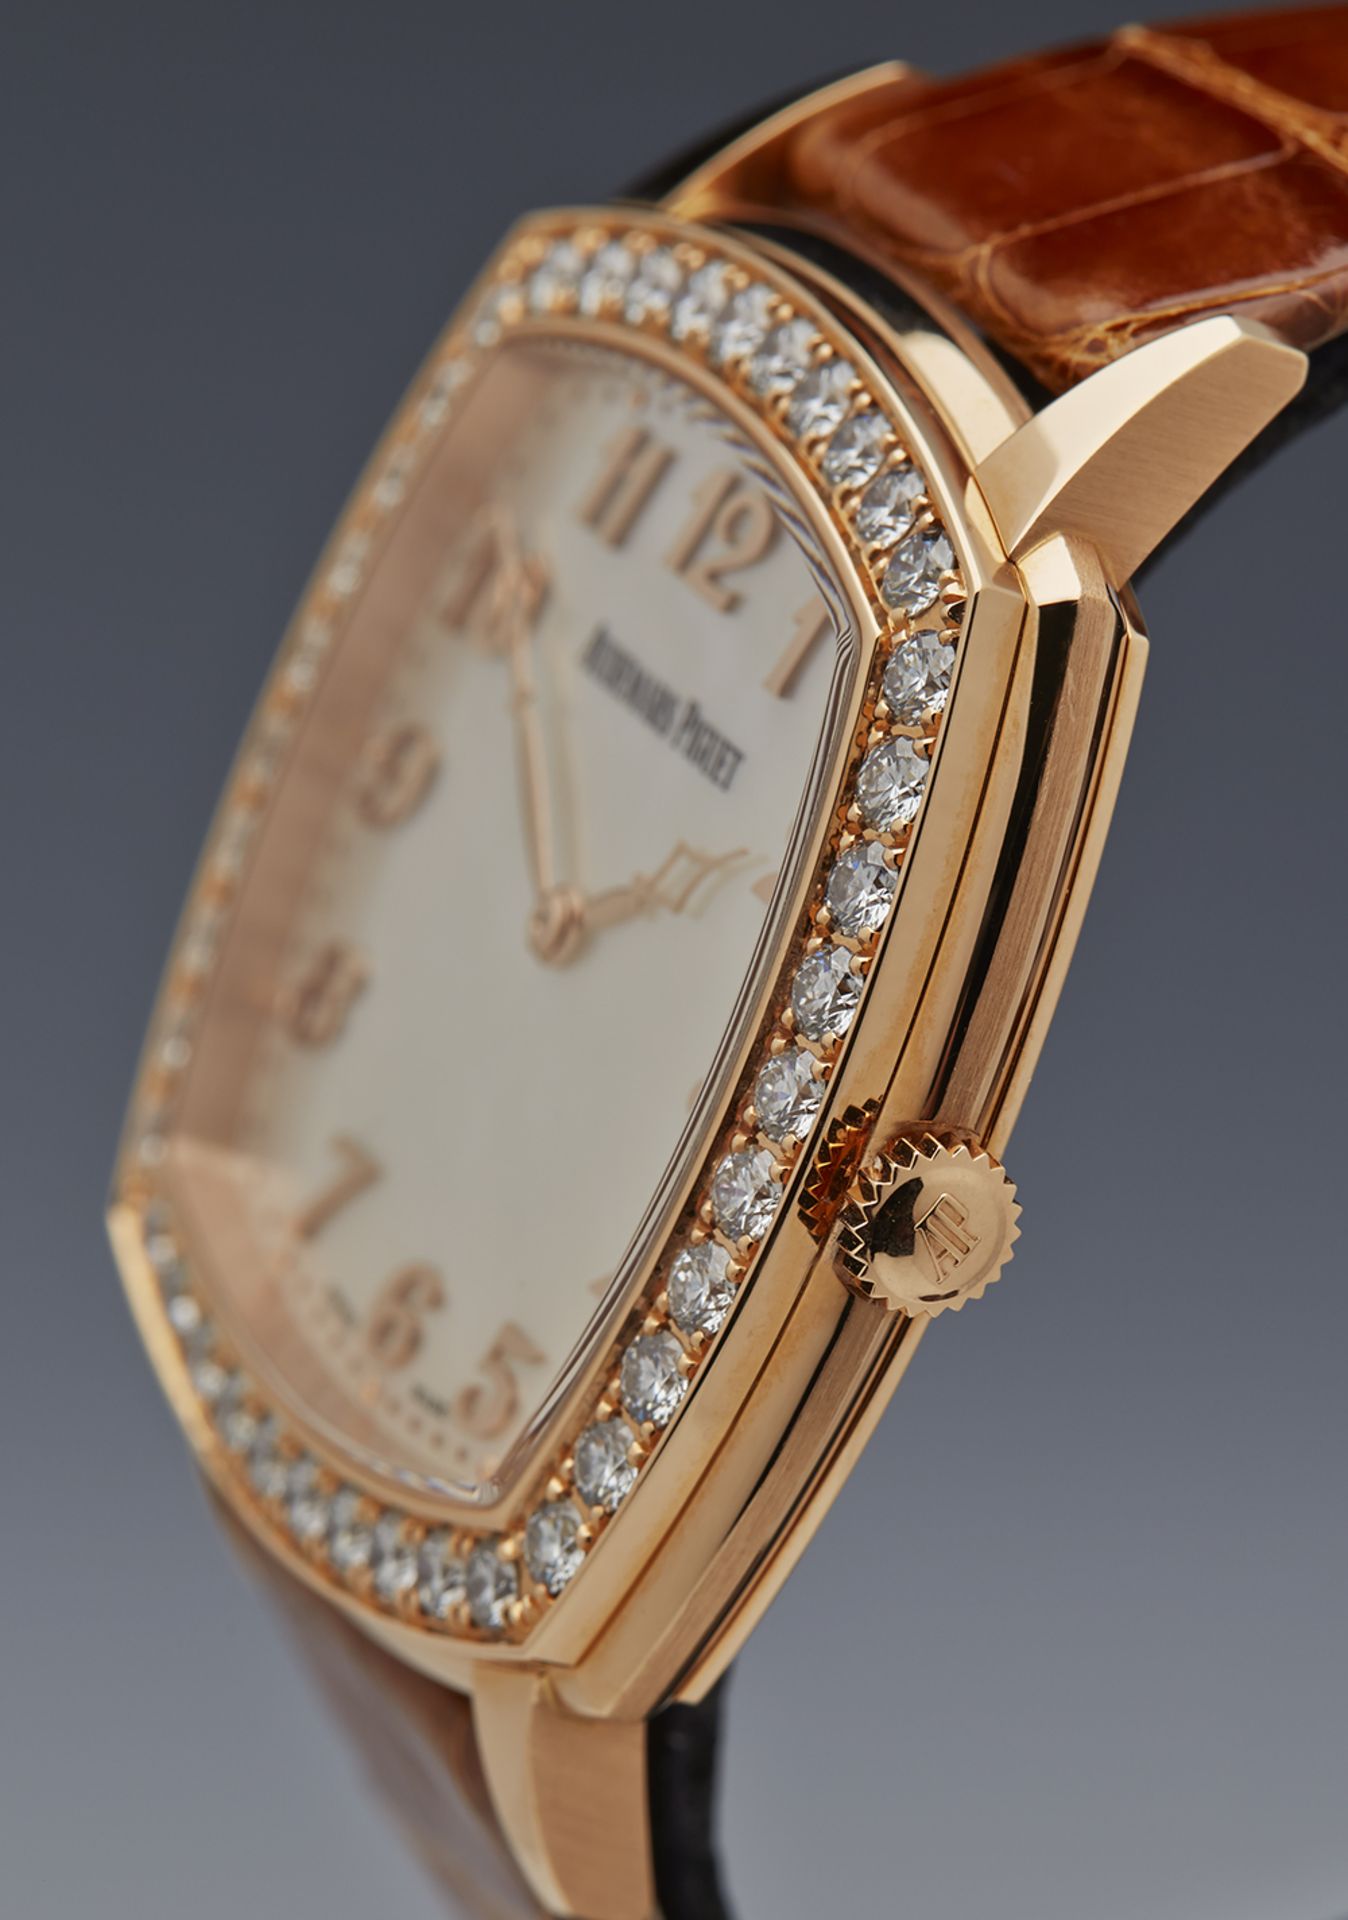 Audemars Piguet, Tradition Extra Thin 18k Rose Gold Diamonds MOP 15337OR.ZZ.A810CR.01 - Image 5 of 11